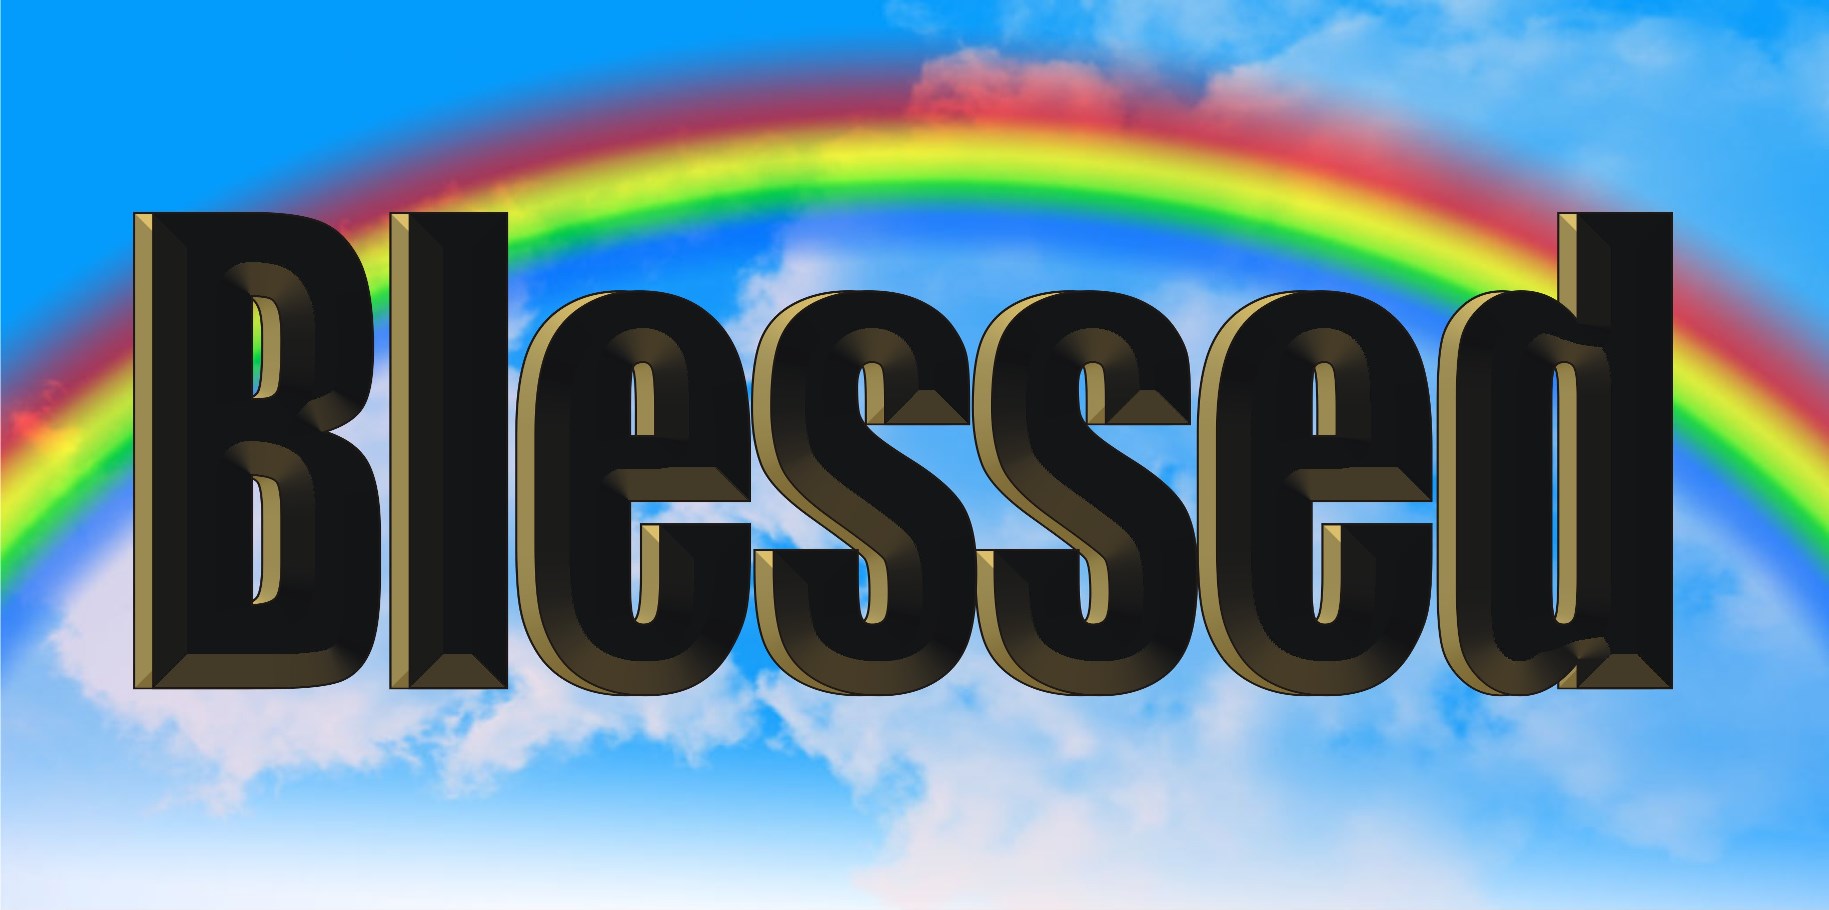 Blessed Rainbow Photo LICENSE PLATE